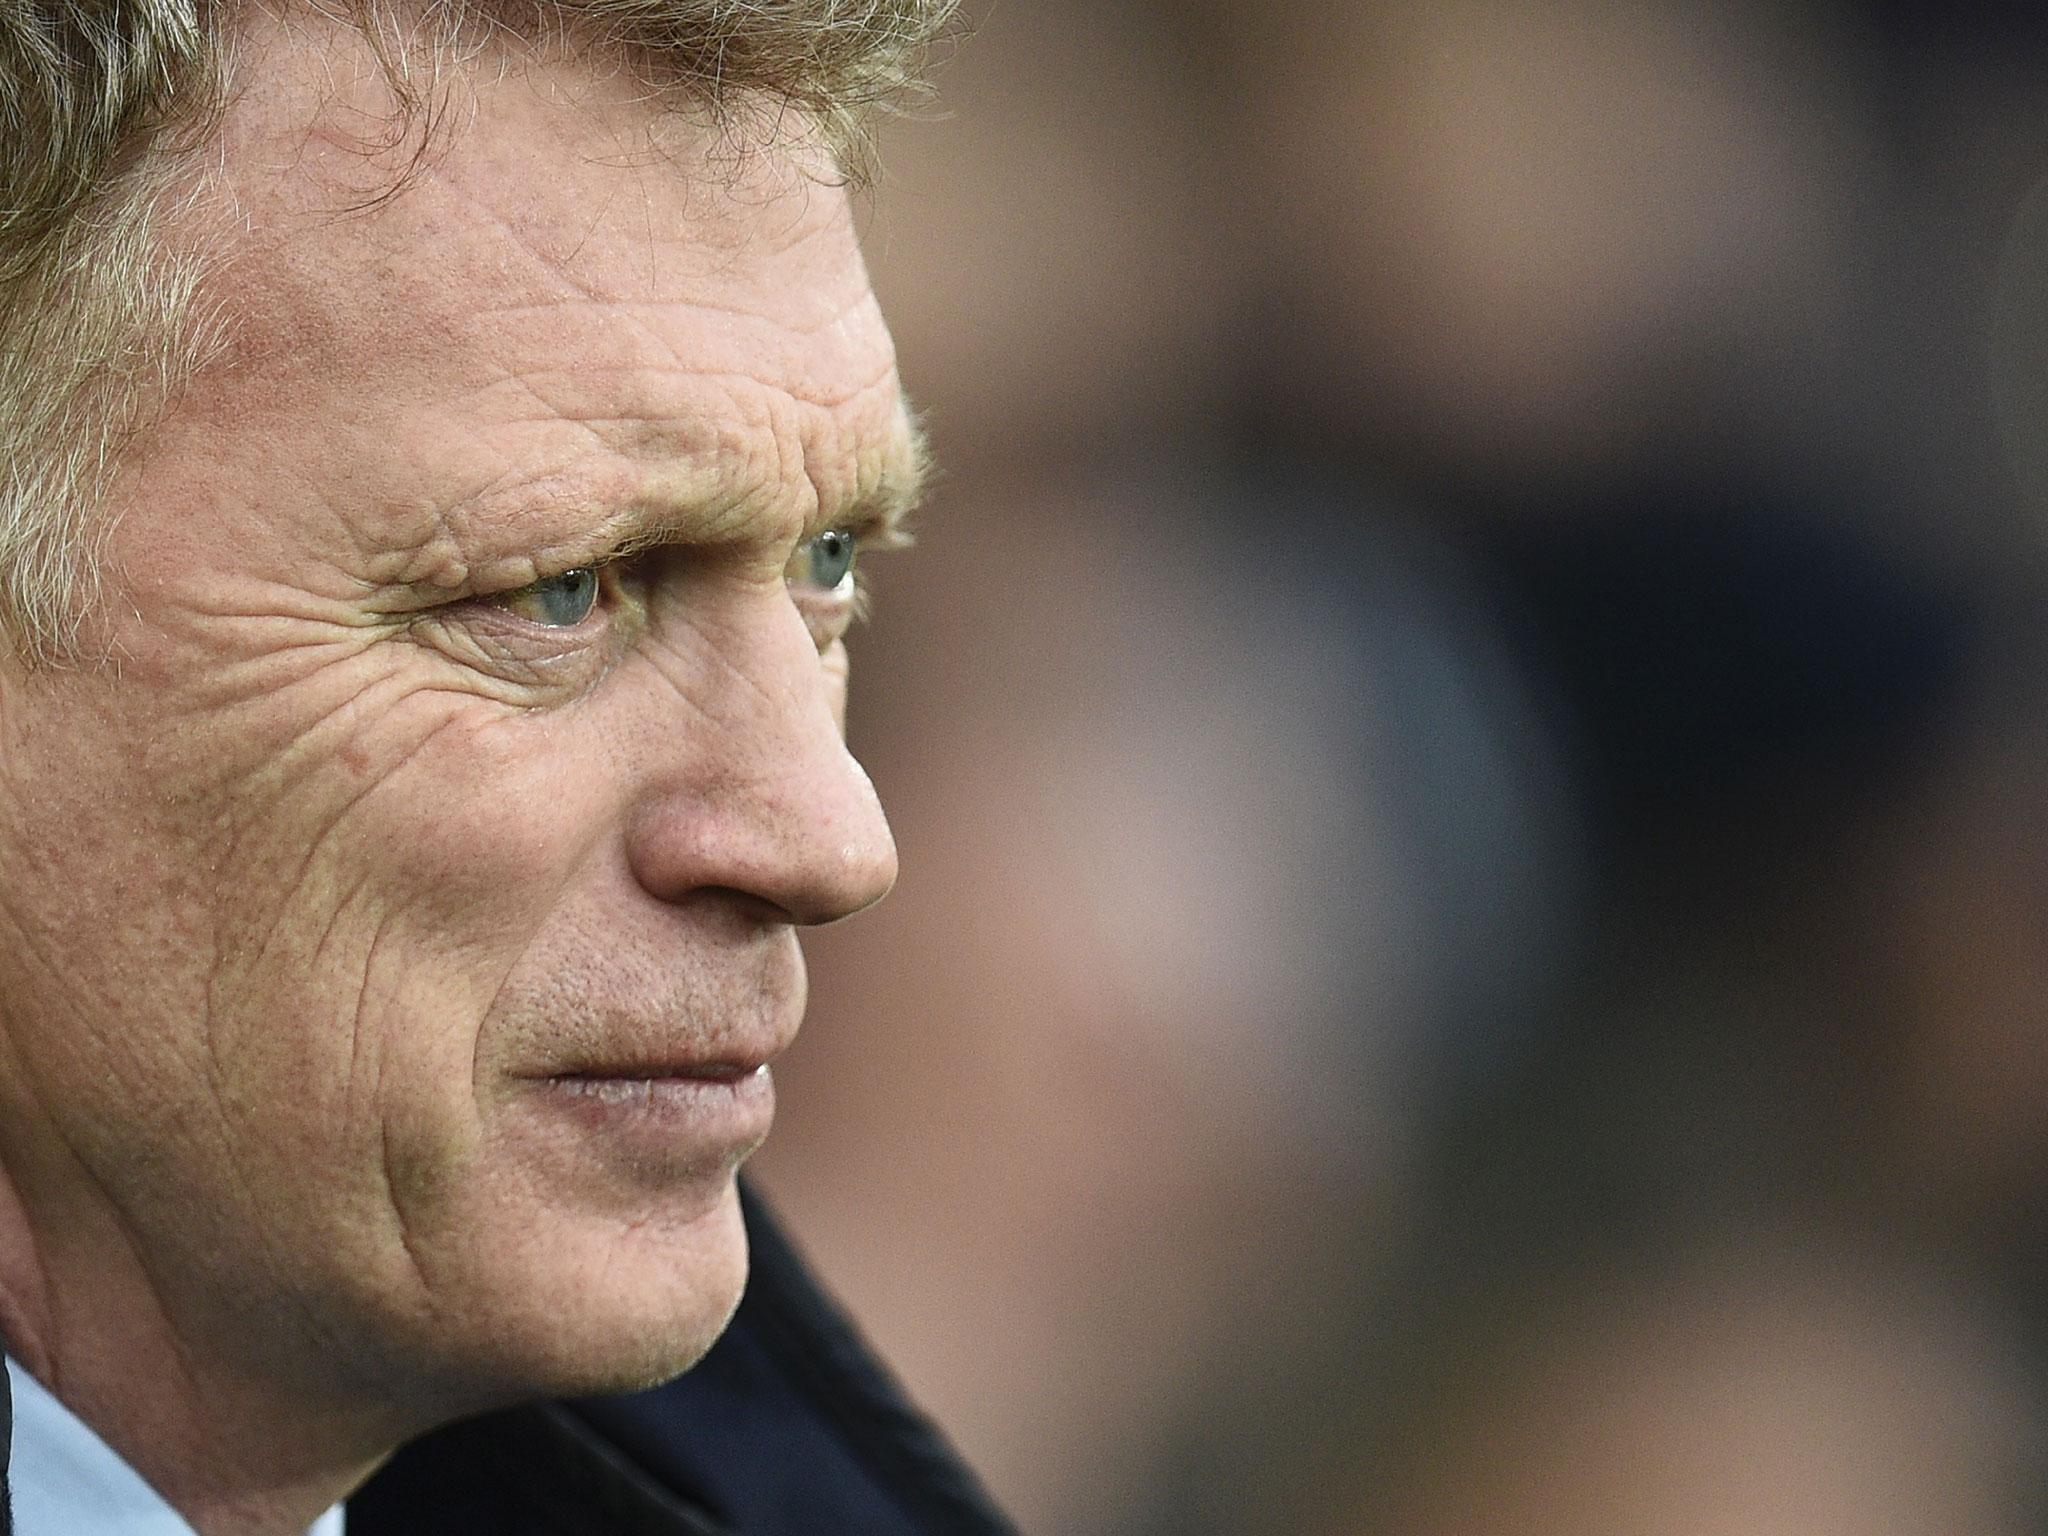 David Moyes has until next Wednesday to respond to the charge